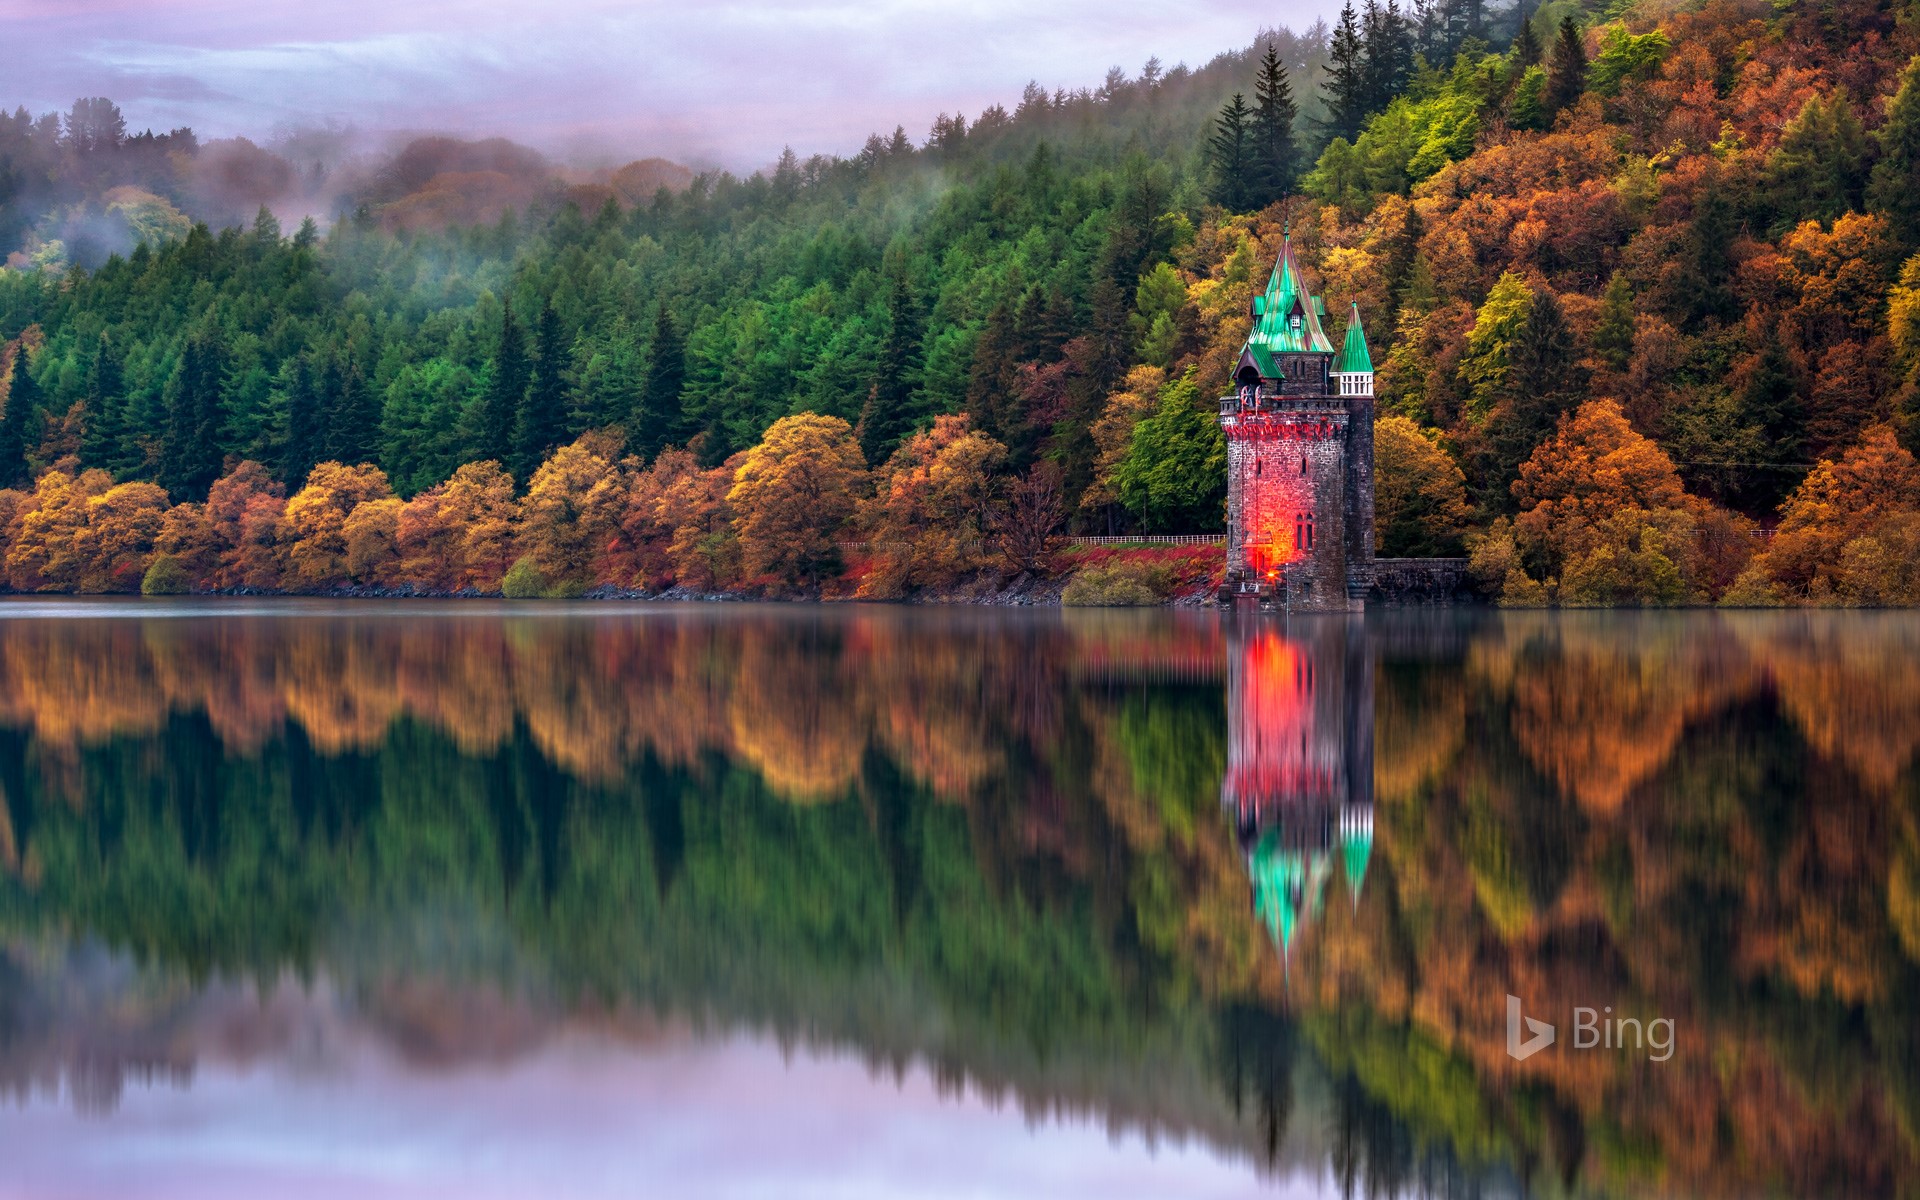 The straining tower at Lake Vyrnwy in Powys, Wales